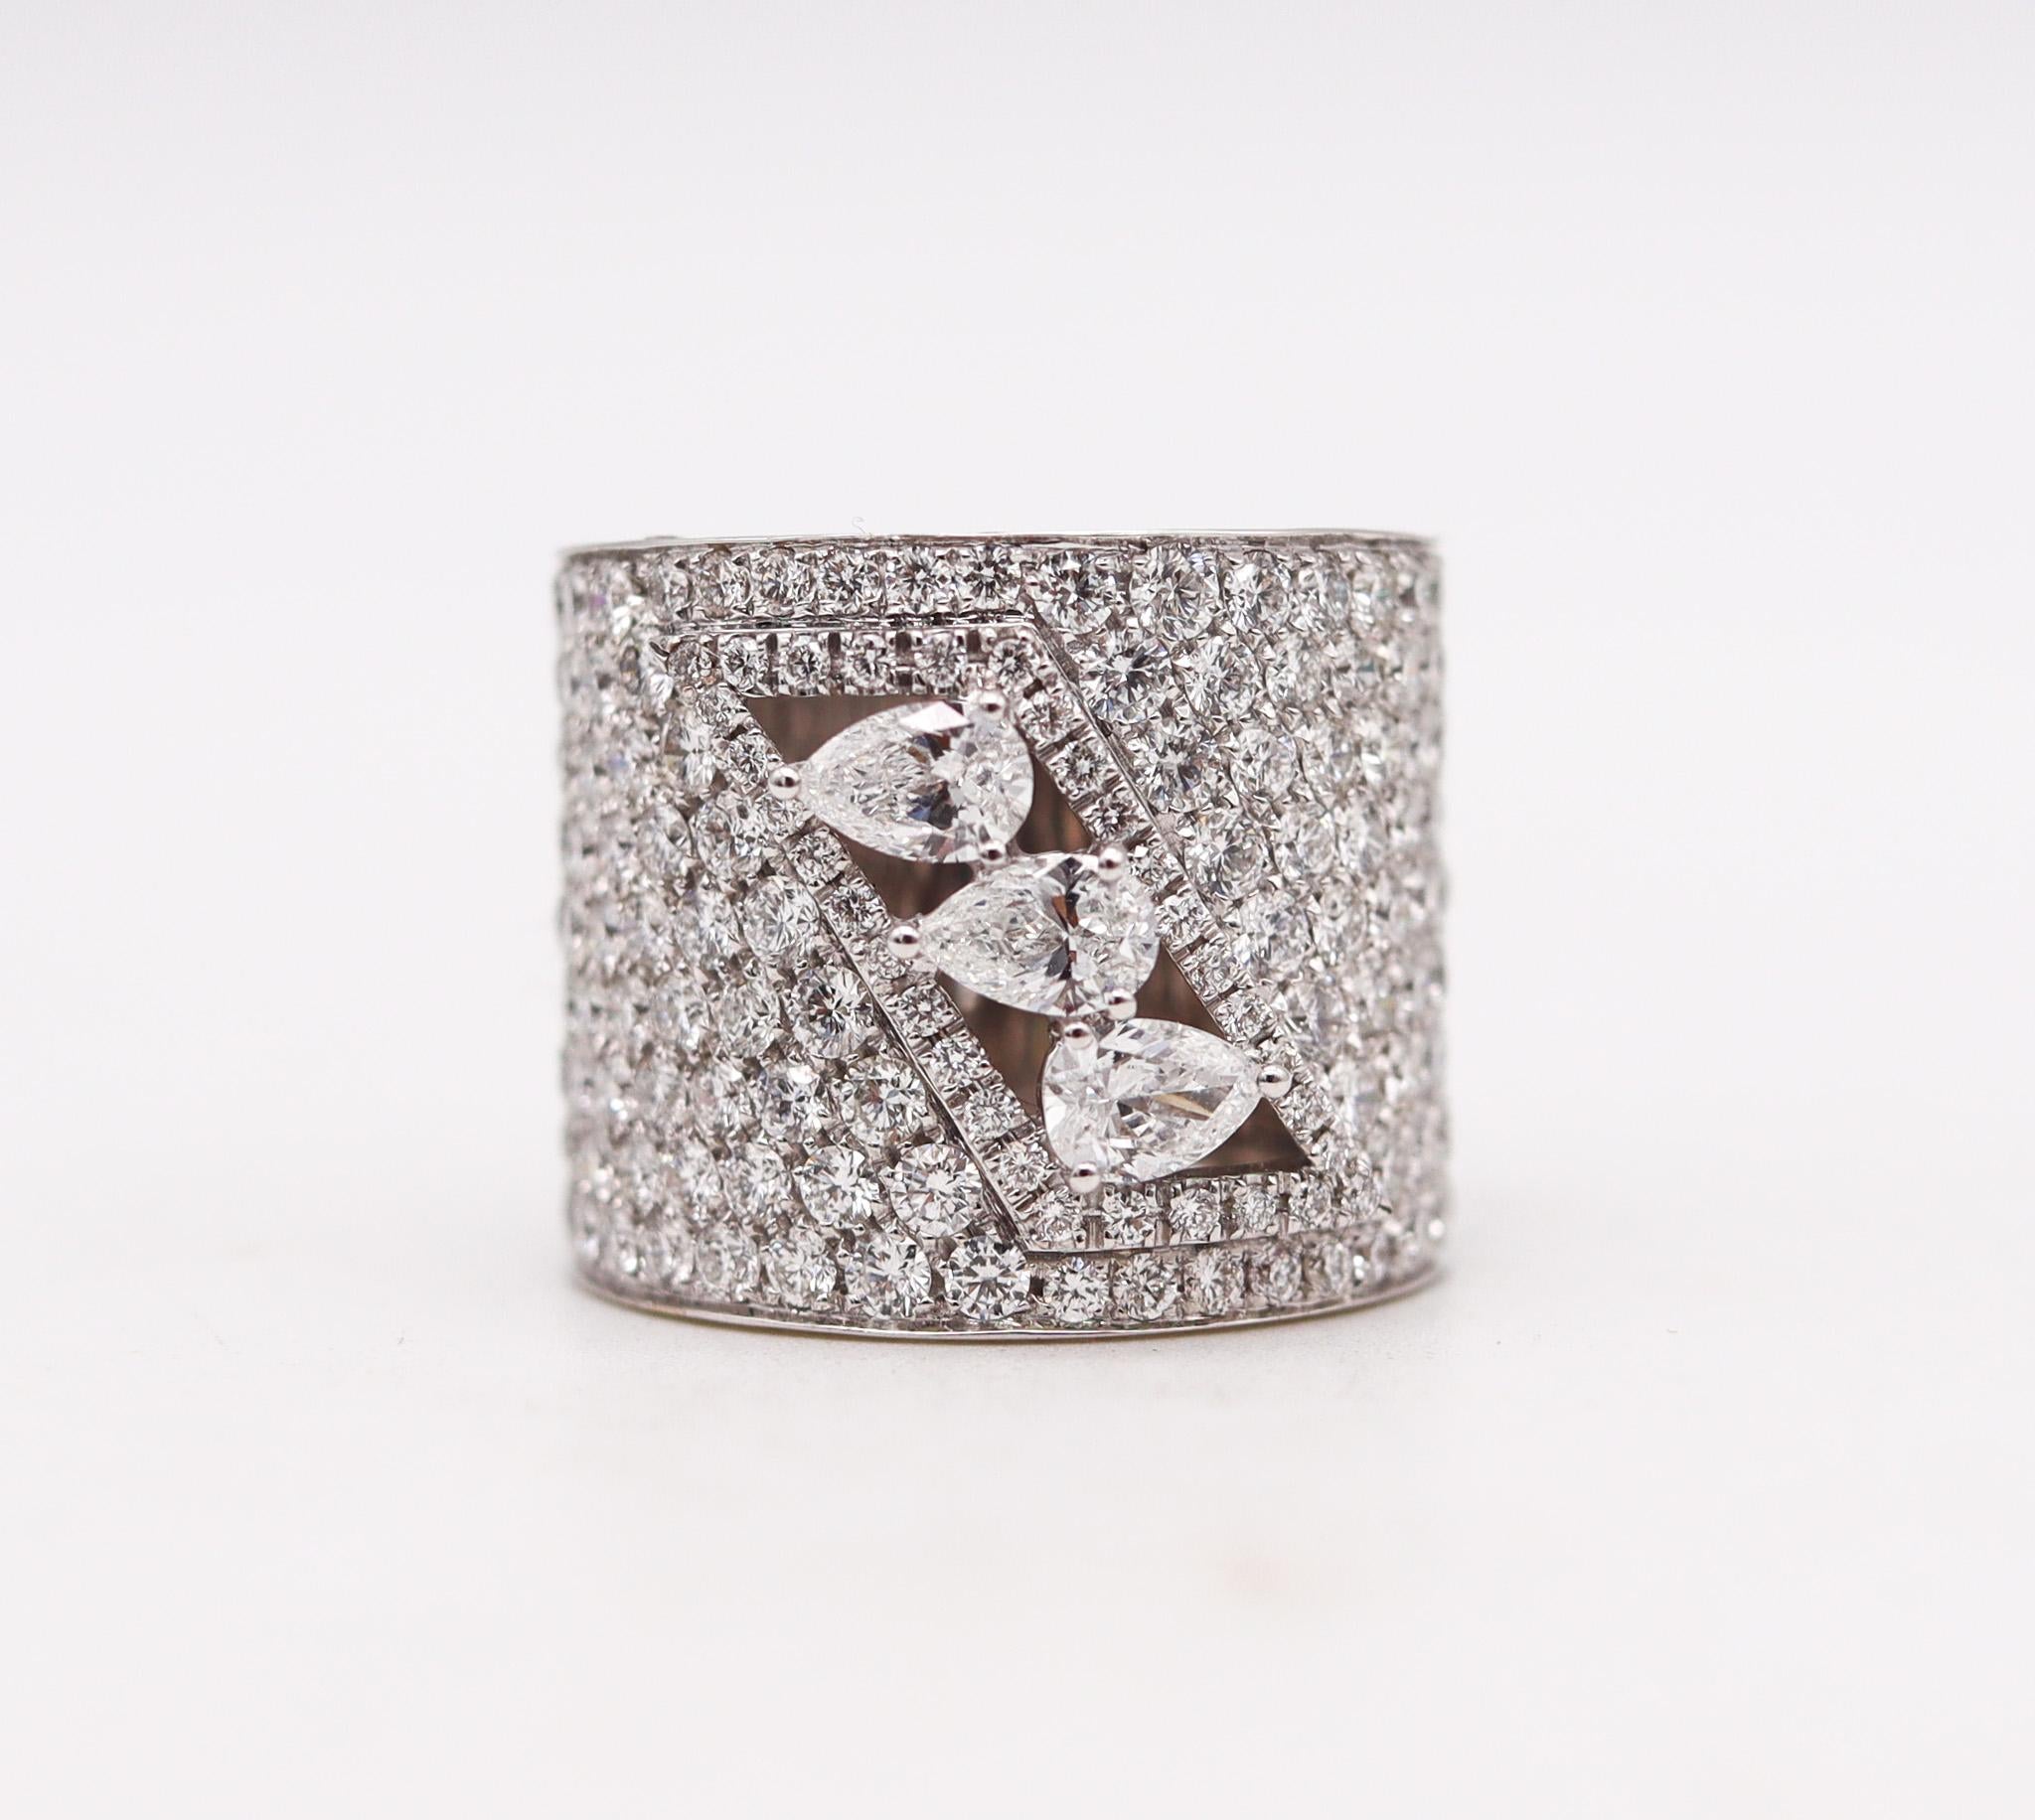 Ring band designed by Graff.

A stunning statement ring, created by the retailer company Graff. It is a contemporary ring crafted with impeccable detail as expected from this company in solid white gold of 18 karats with high polished finish. It is